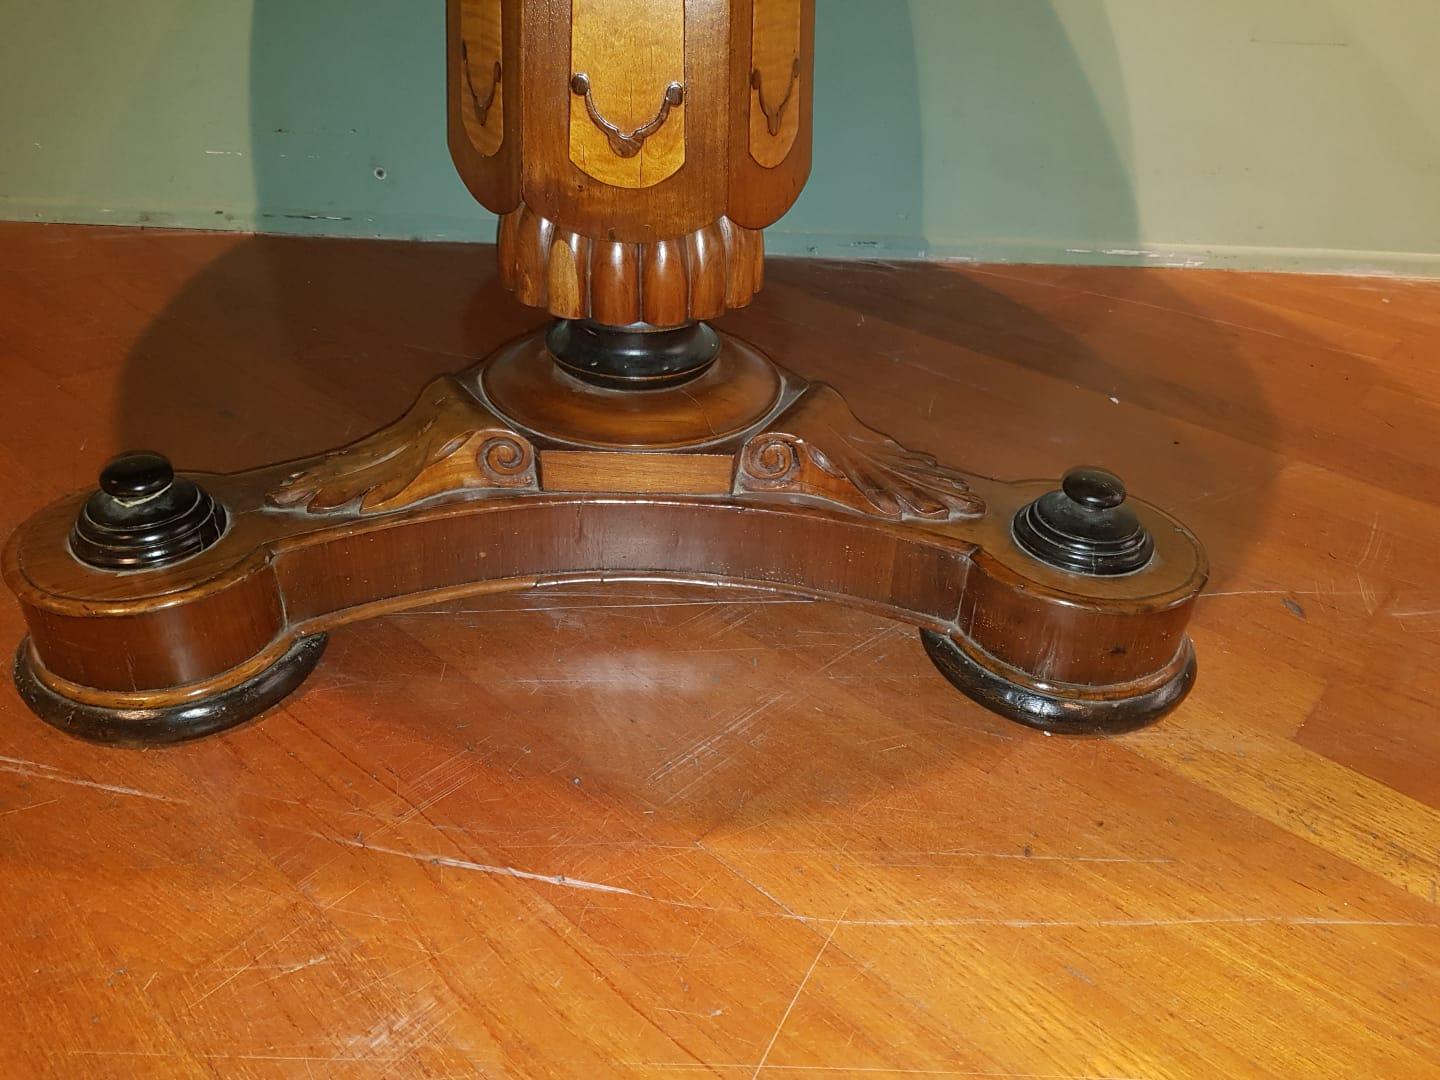 19th century engraved wood rounded marquinia marble-top table, France Charles X

19th century engraved rounded black marquinia marble-top table. From France from 19th century. The central leg is finely engraved with nut and other essences. The